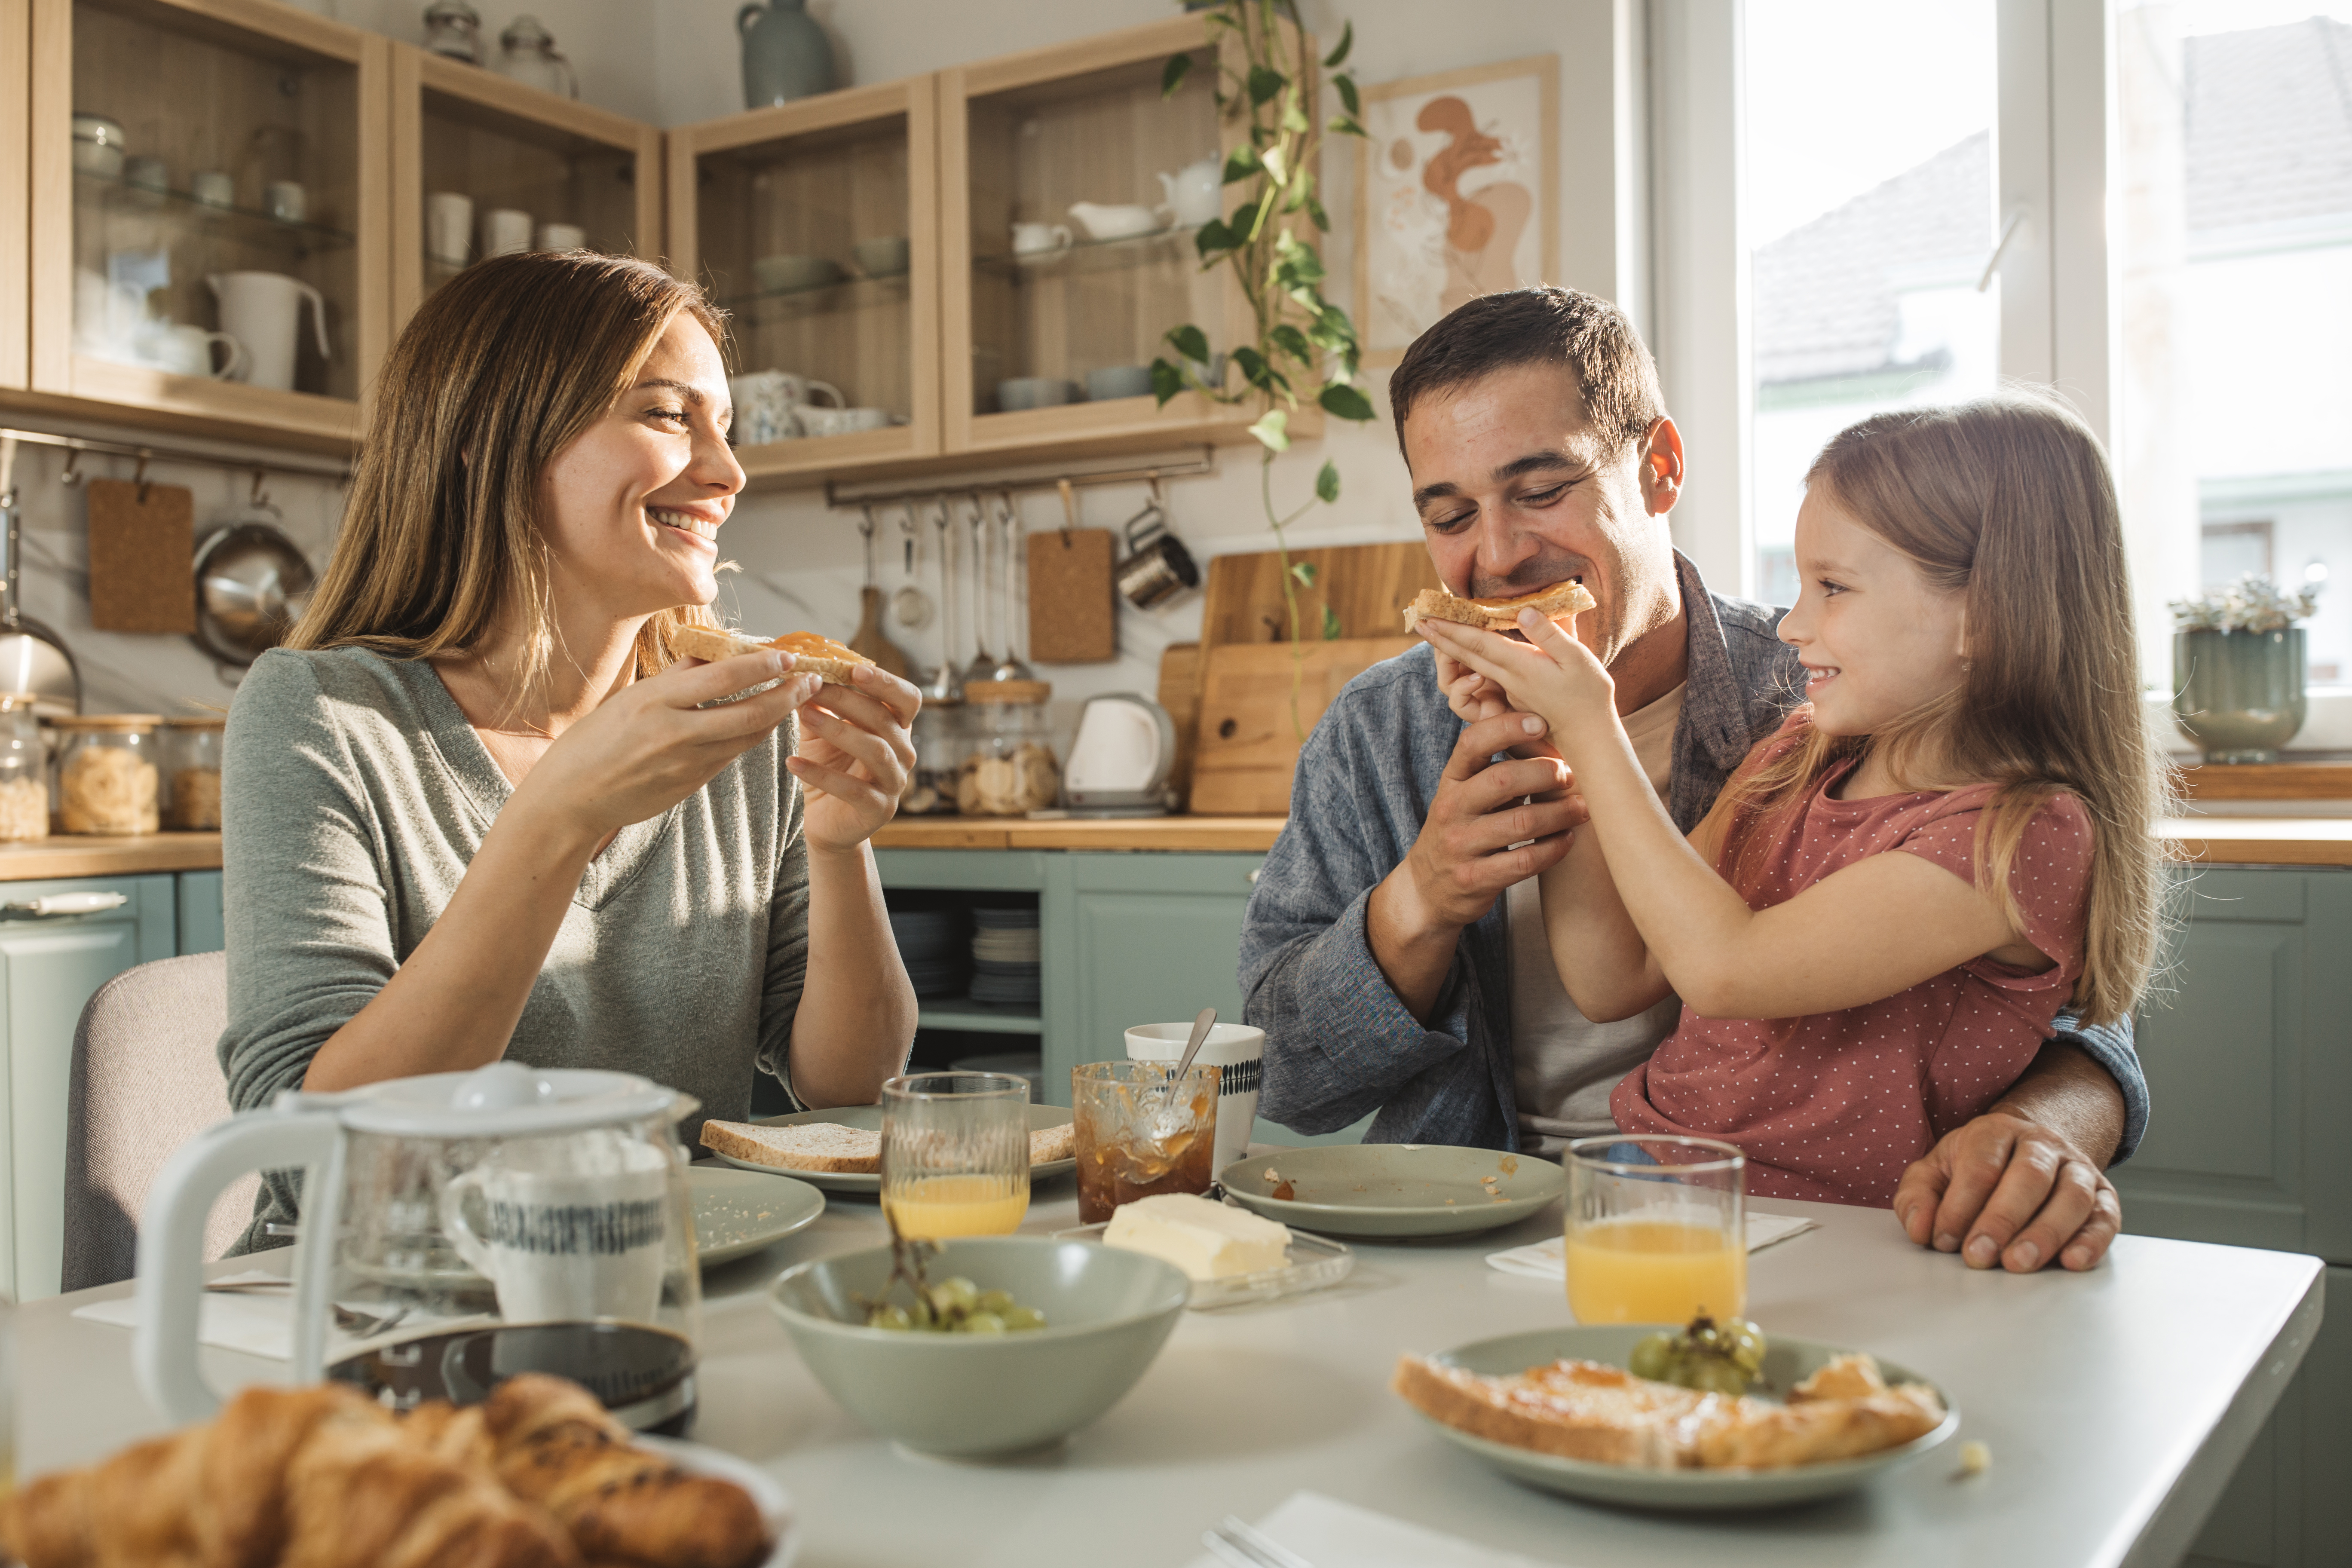 Family breakfast | Source: Getty Images